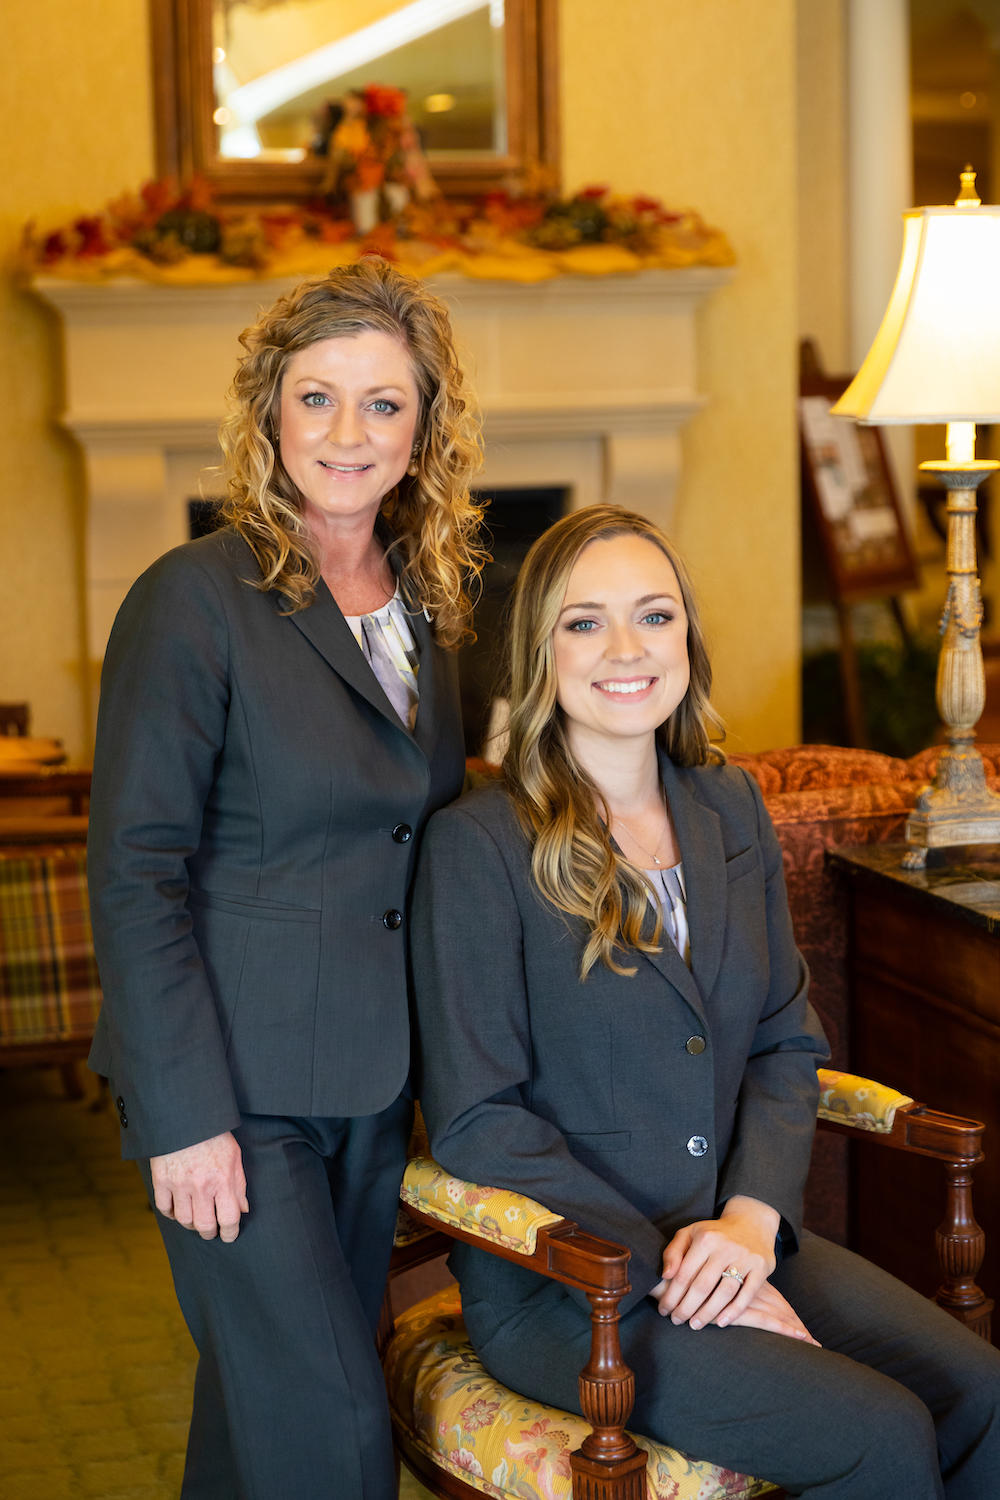 Langeland Family Funeral Homes Burial & Cremation Services Photo